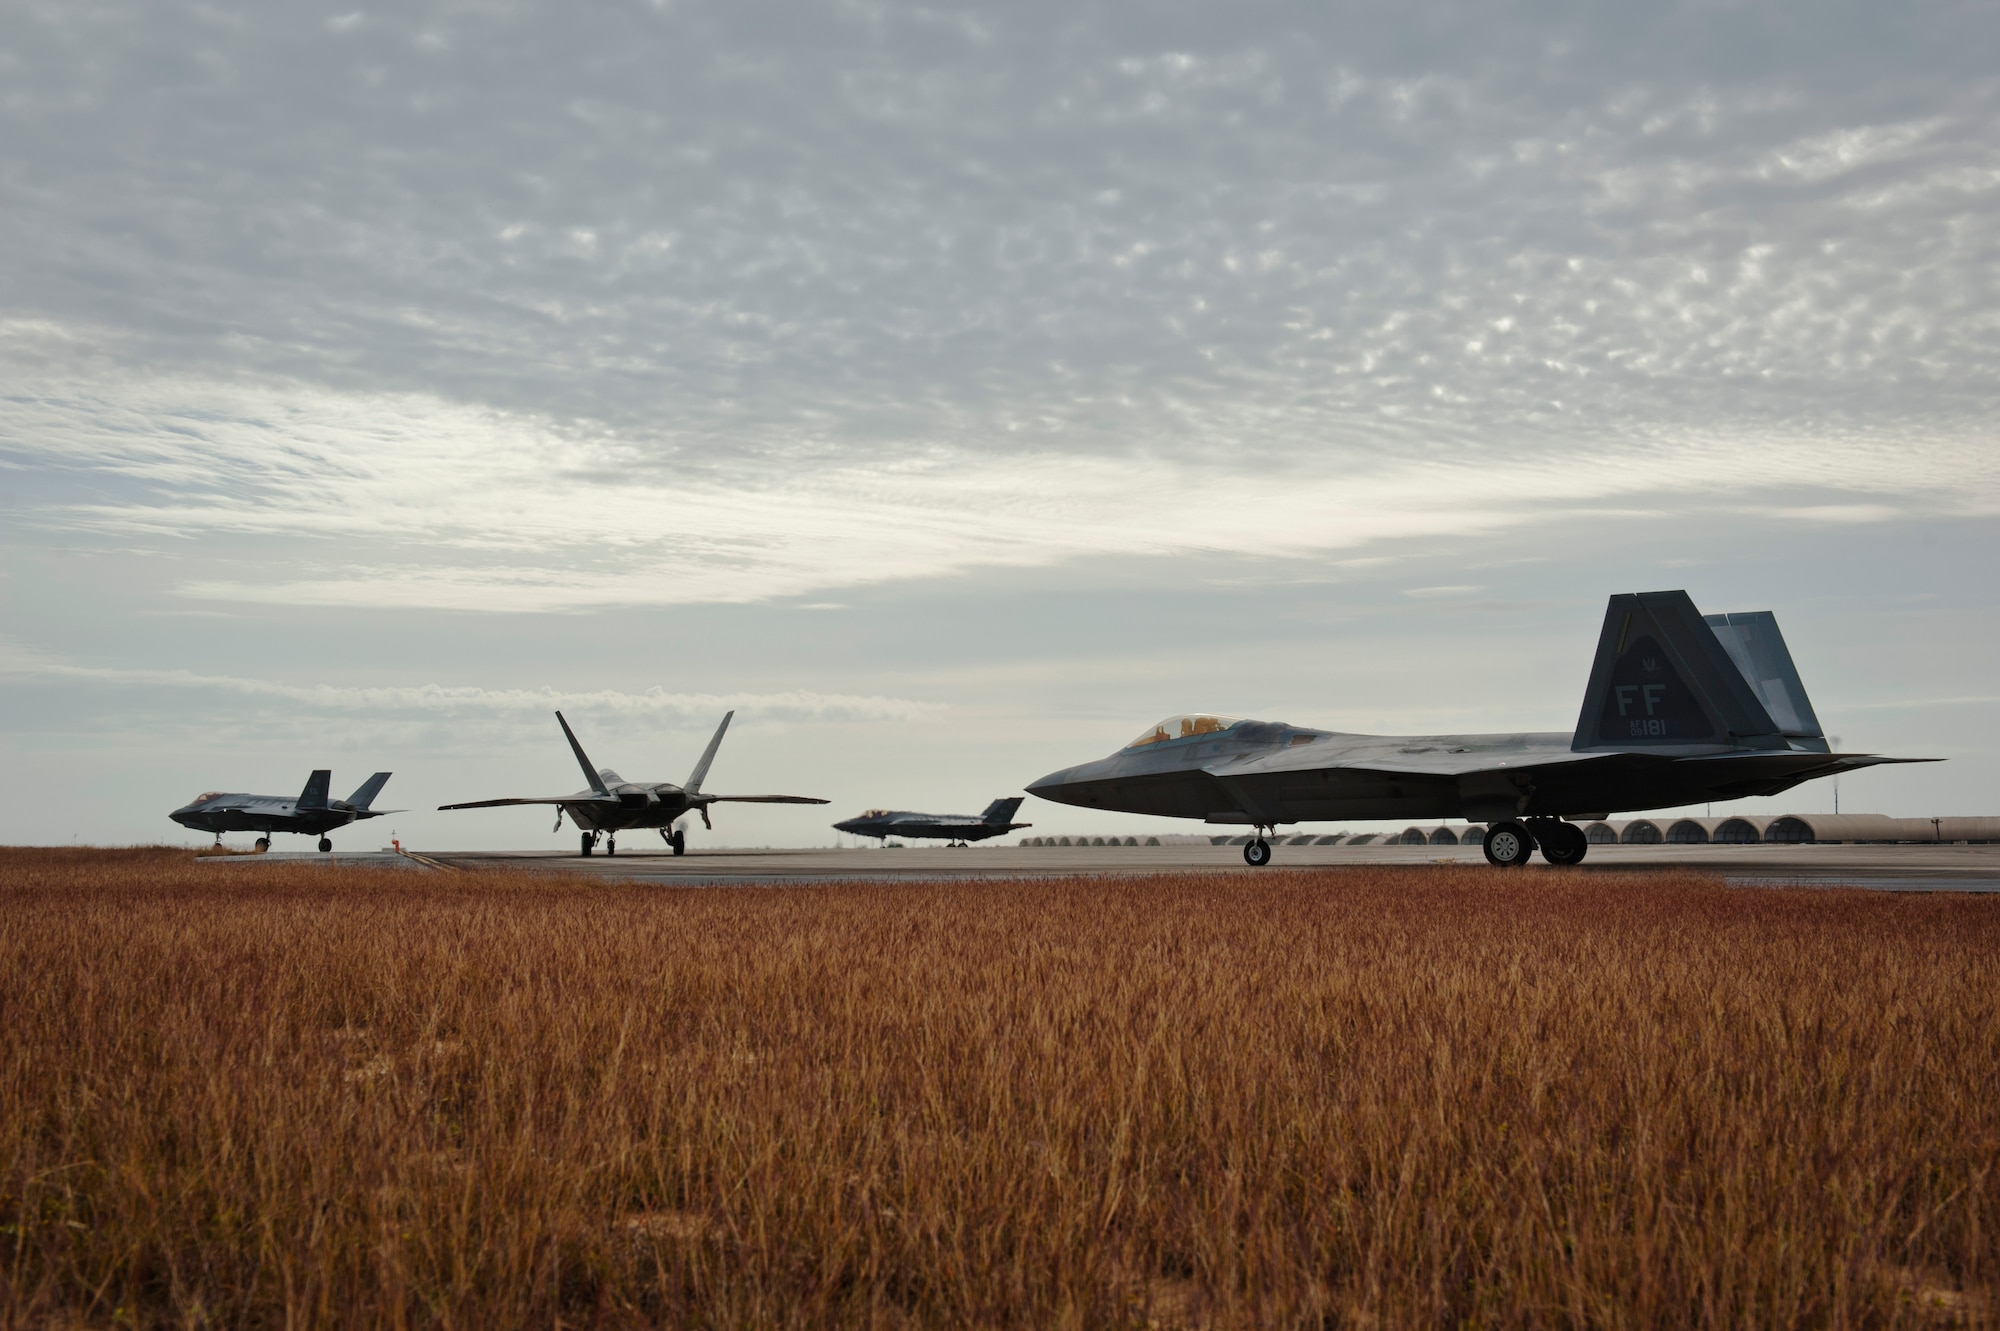 F-22 Raptors from the 94th Fighter Squadron, Joint Base Langley-Eustis, Virginia, and F-35A Lightning IIs from the 58th Fighter Squadron, Eglin Air Force Base, Florida, perform final preflight checks before taking off for an integration training mission on Eglin Training Range, Florida, Nov. 6, 2014. The F-35s and F-22s flew offensive counter air, defensive counter air and interdiction missions, maximizing effects by employing fifth-generation capabilities together. (U.S. Air Force photo/Staff Sgt. Marleah Robertson)